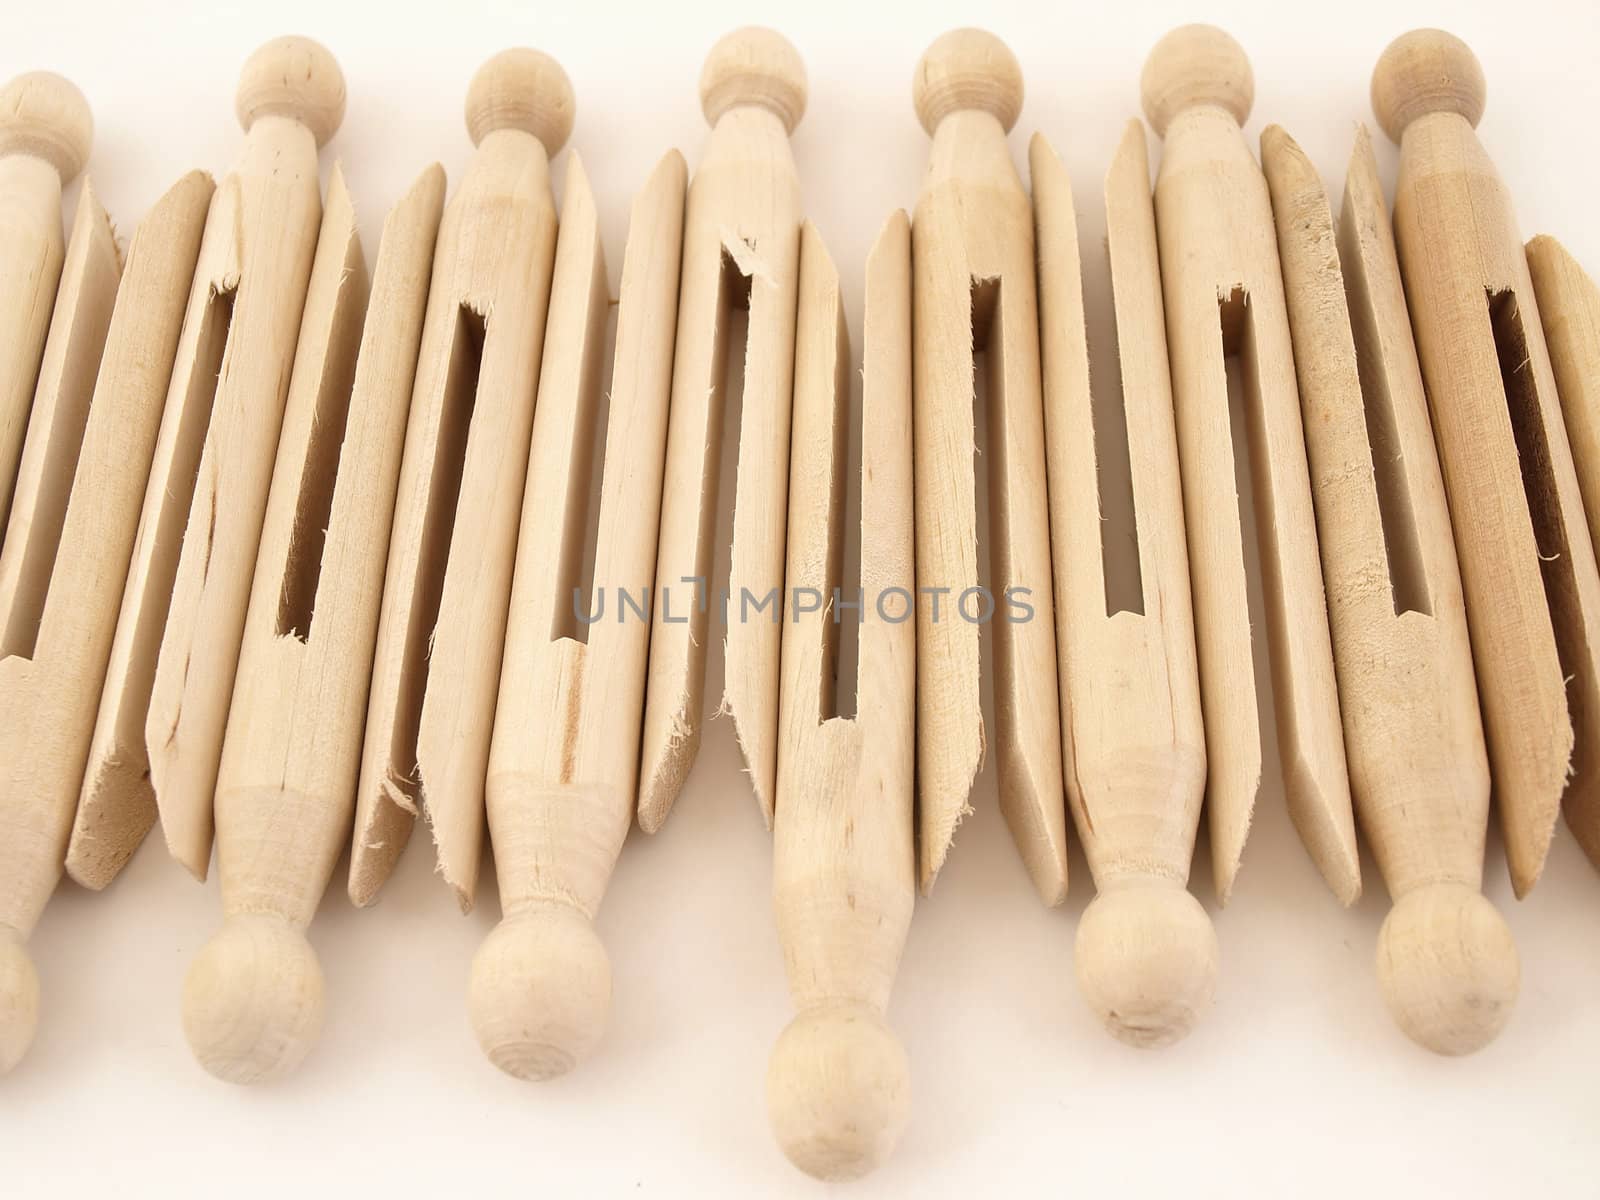 A tidy lineup of old fashioned clothespins isolated against a white background.